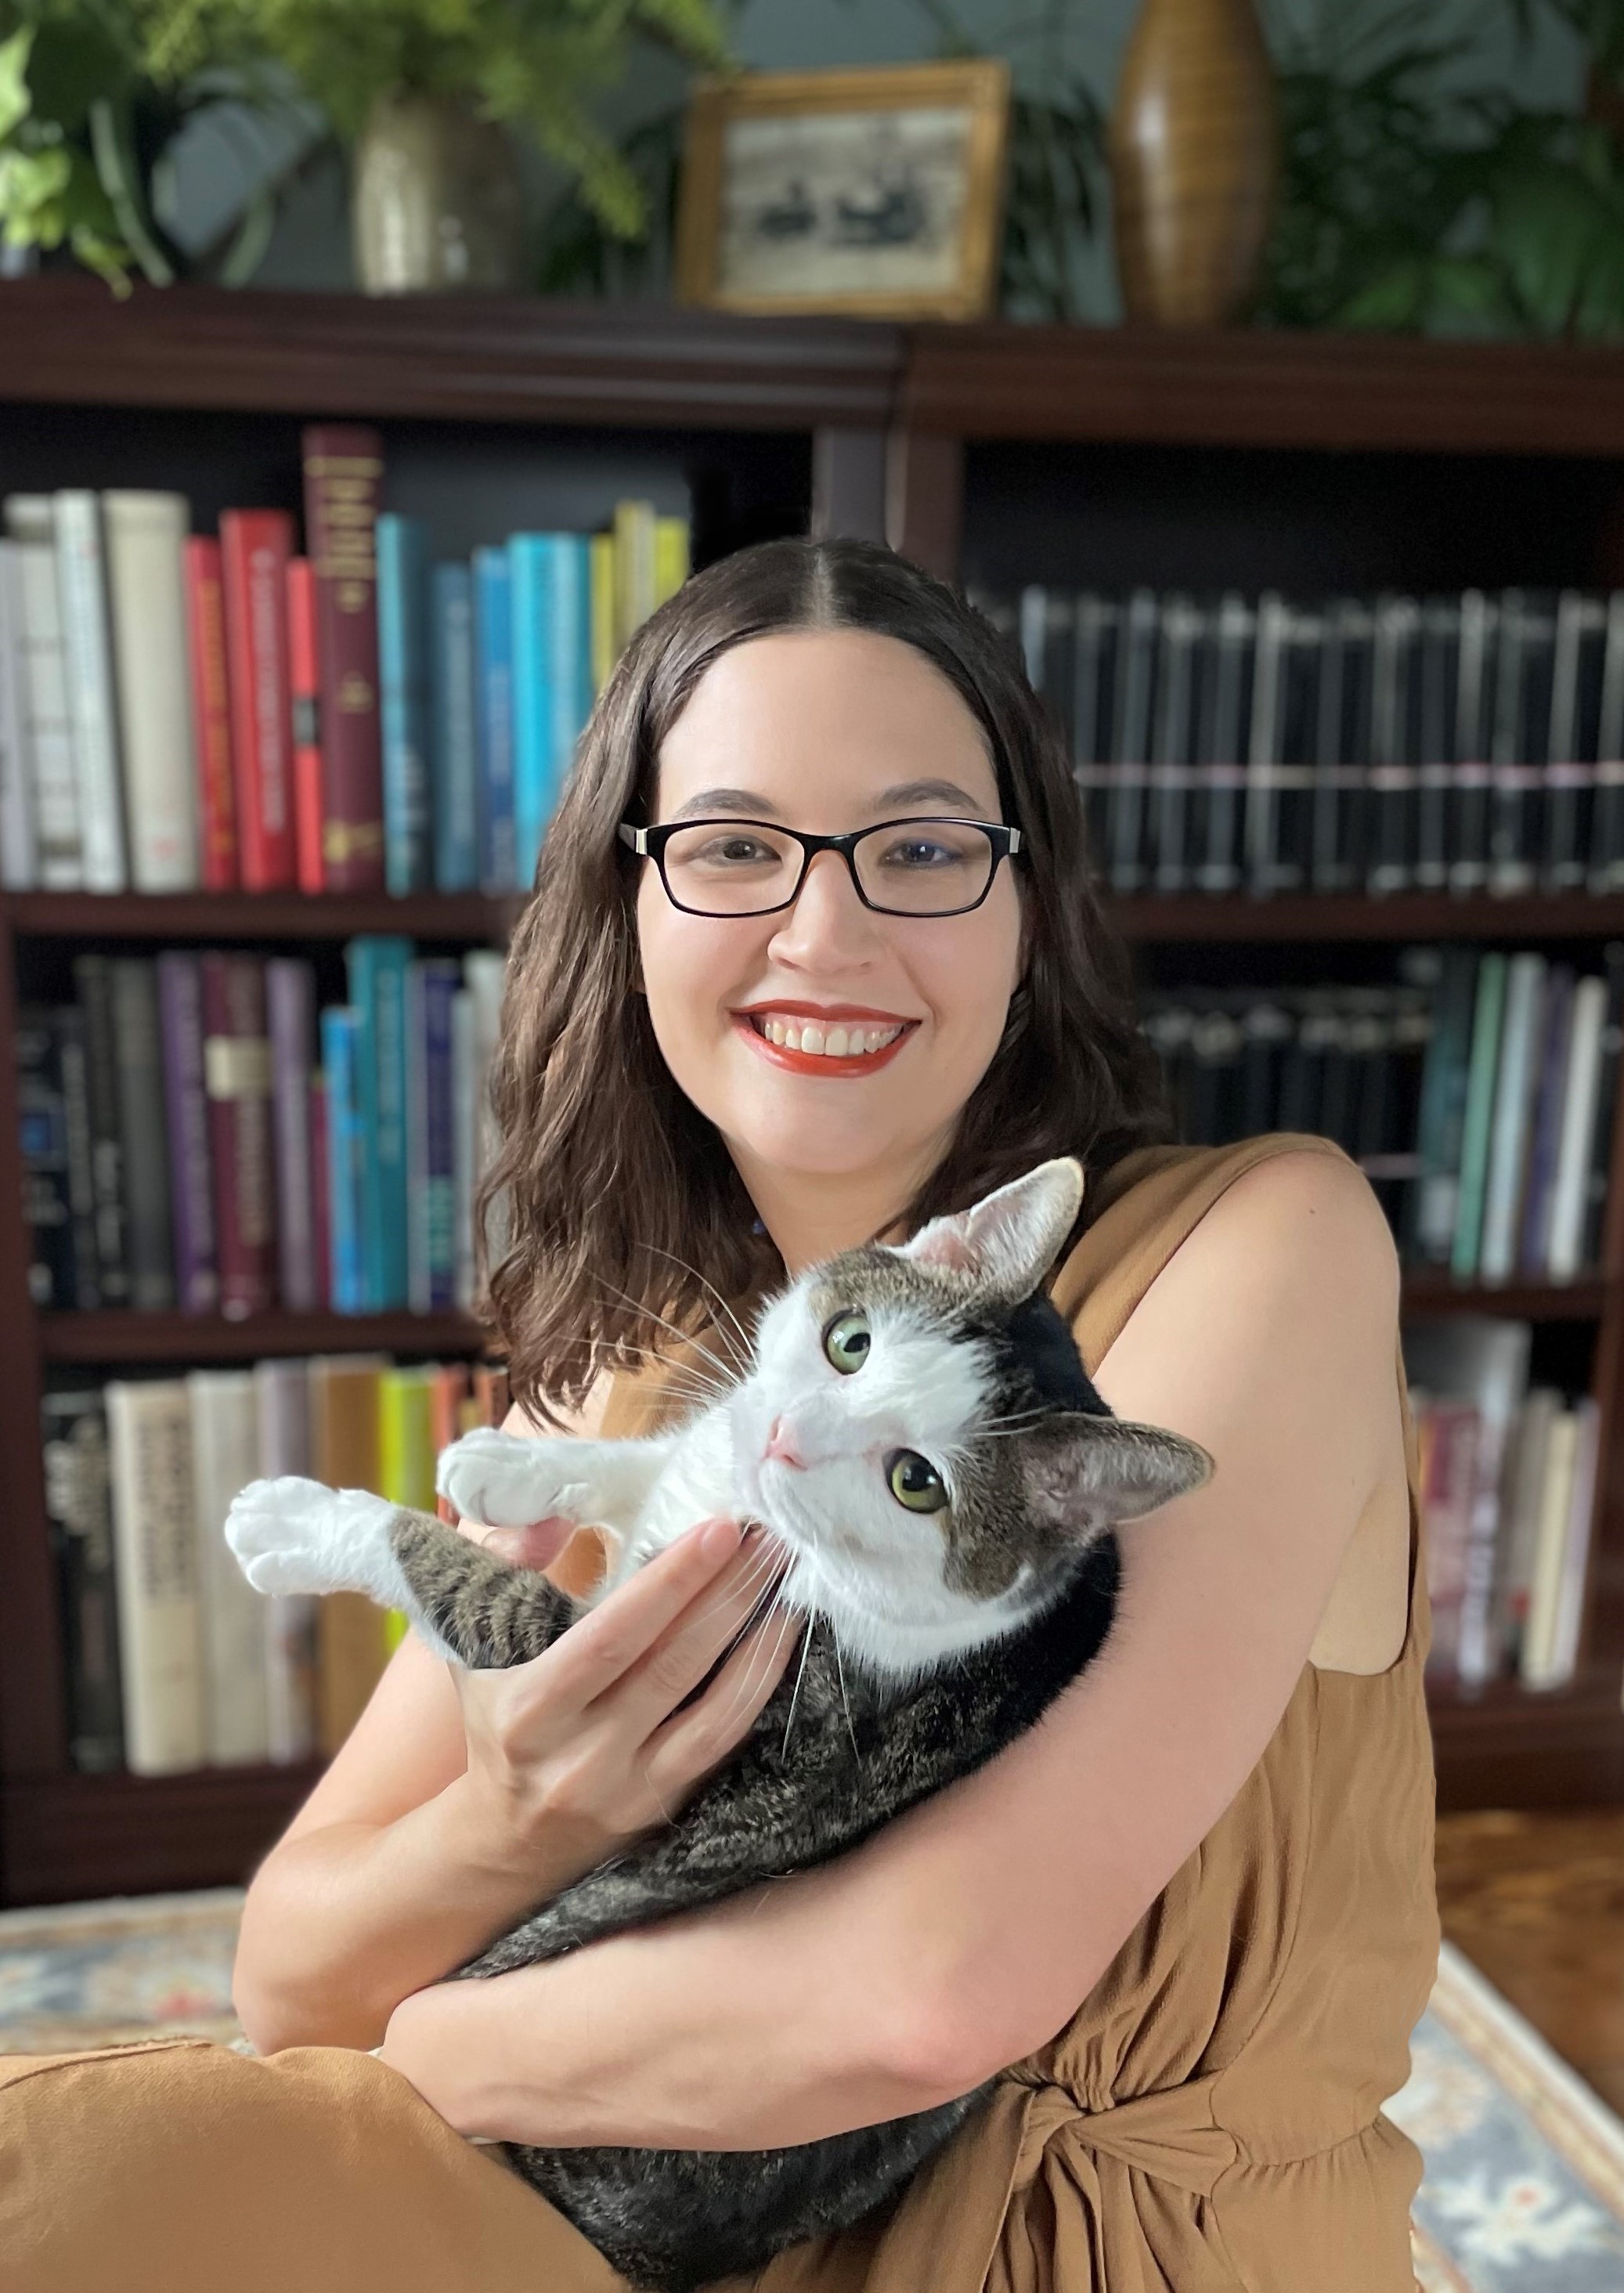 Melissa Farr is smiling and holding her brown and white cat in front of a bookshelf with plants. She has brown wavy hair, glasses, and is wearing a tan jumpsuit.